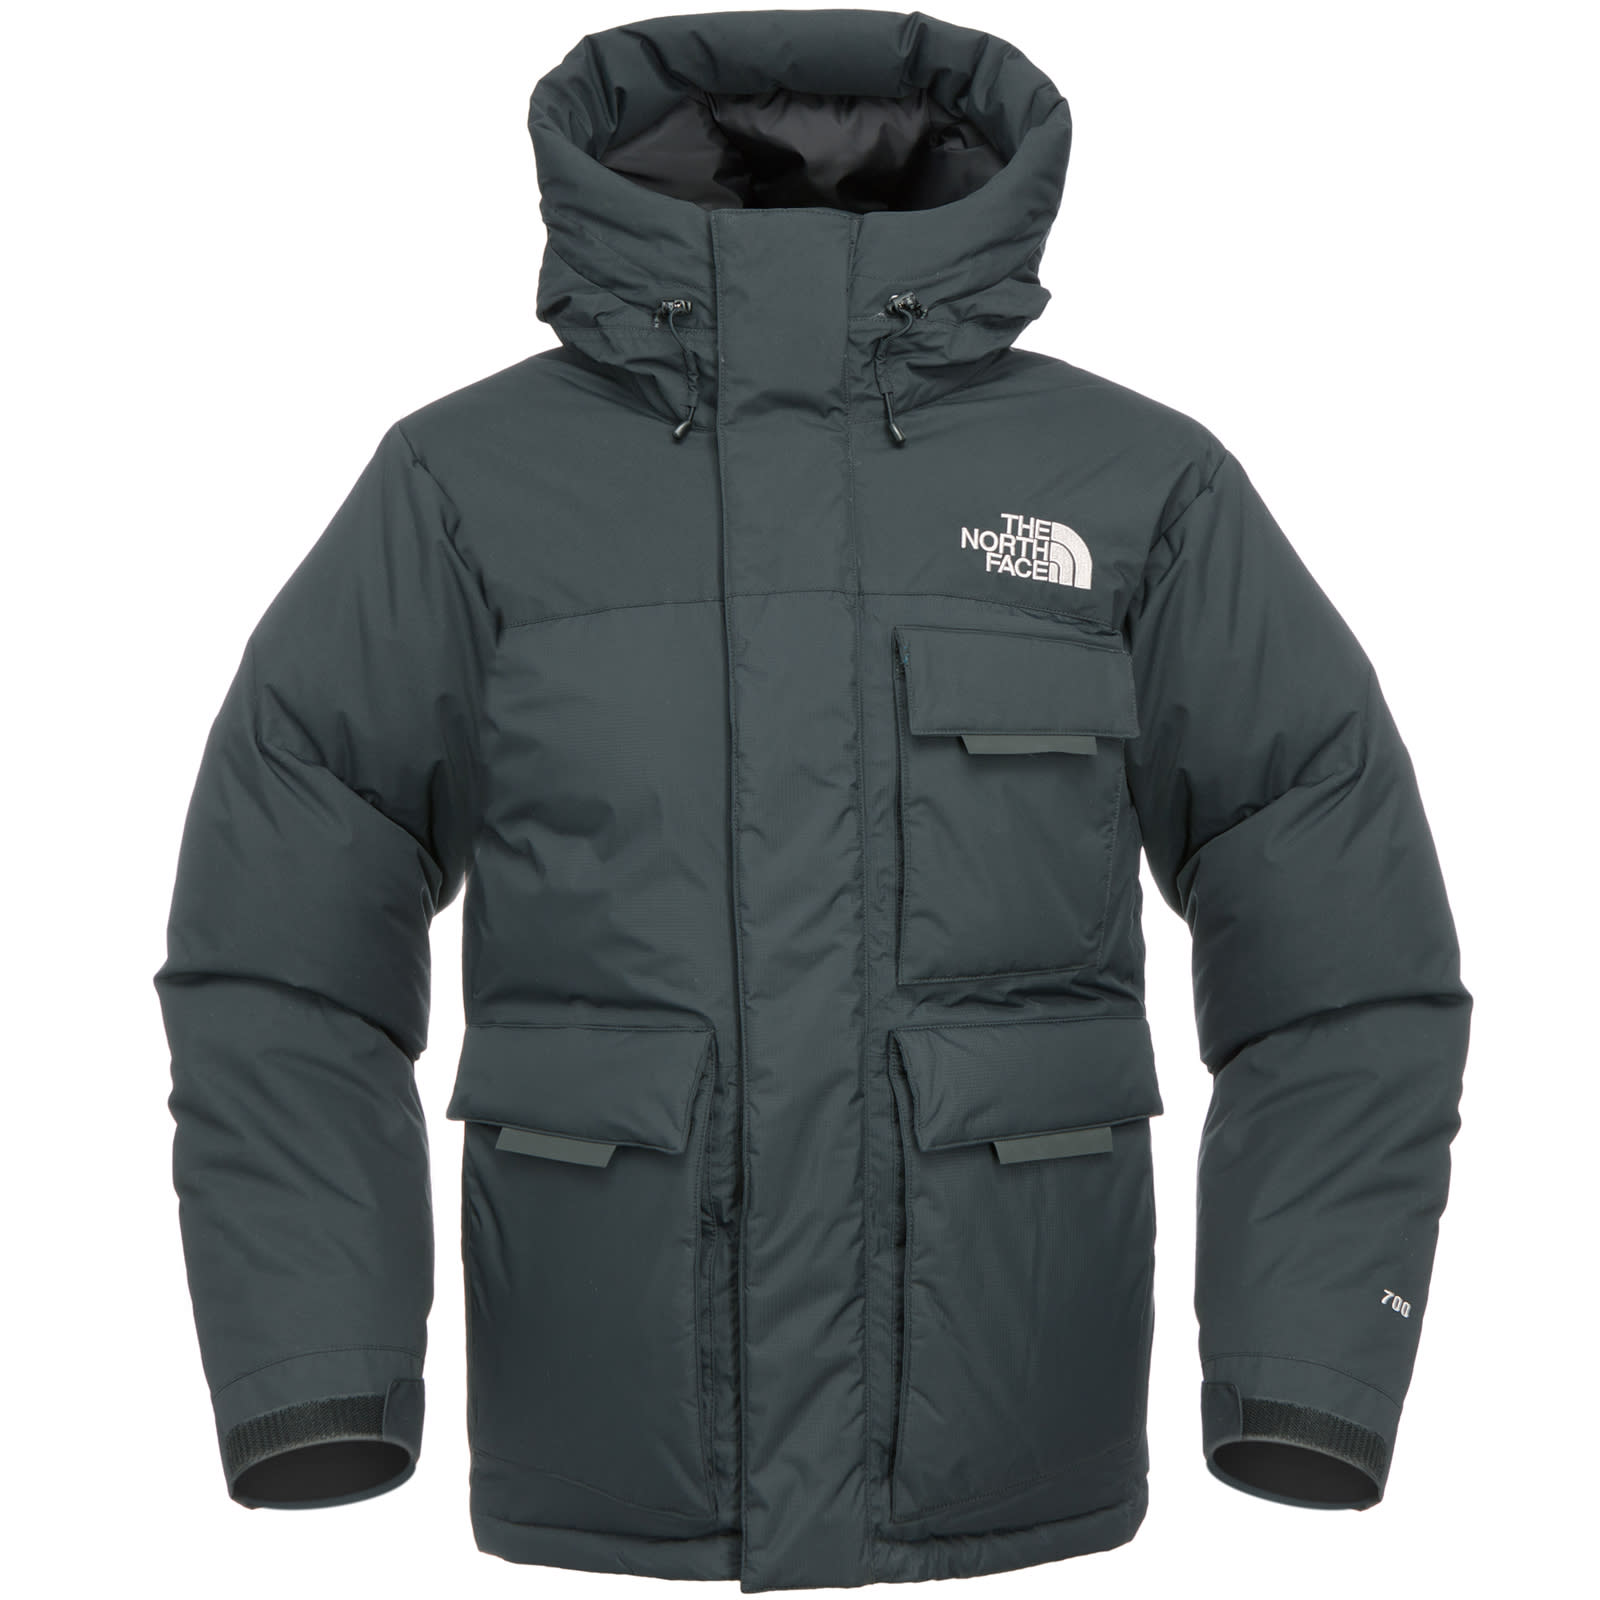 Buy The Face Men's Polar Jacket from Outnorth